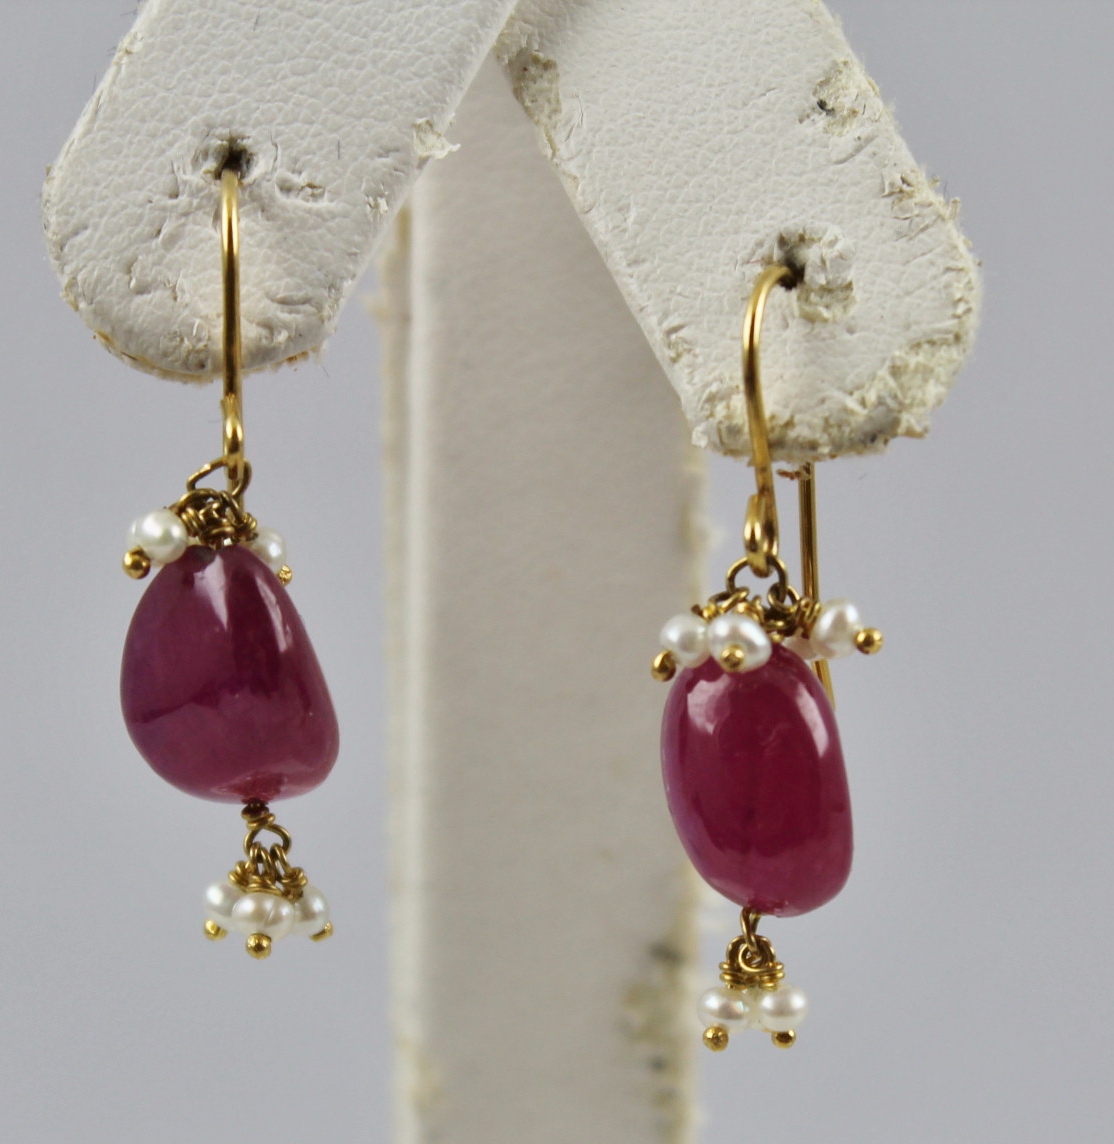 A PAIR OF GOLD COLOURED METAL MOUNTED RUBY AND SEED PEARL EARRINGS, each having a polished pebble